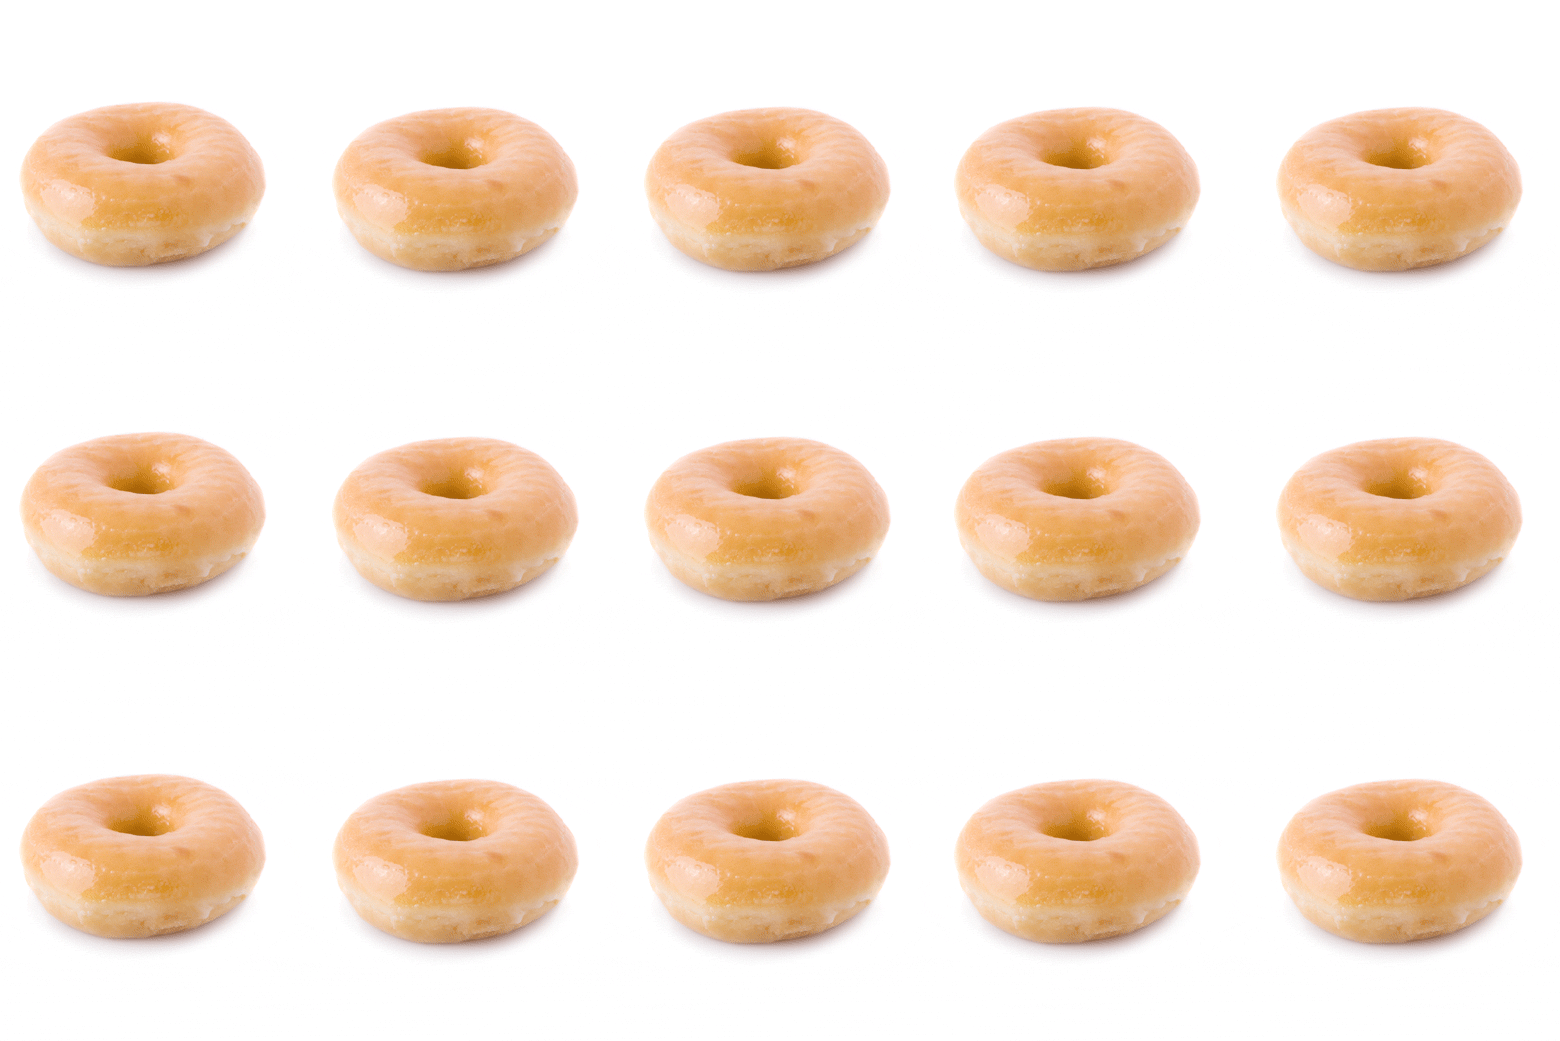 A grid of glazed doughnuts, animated so that they appear one by one.